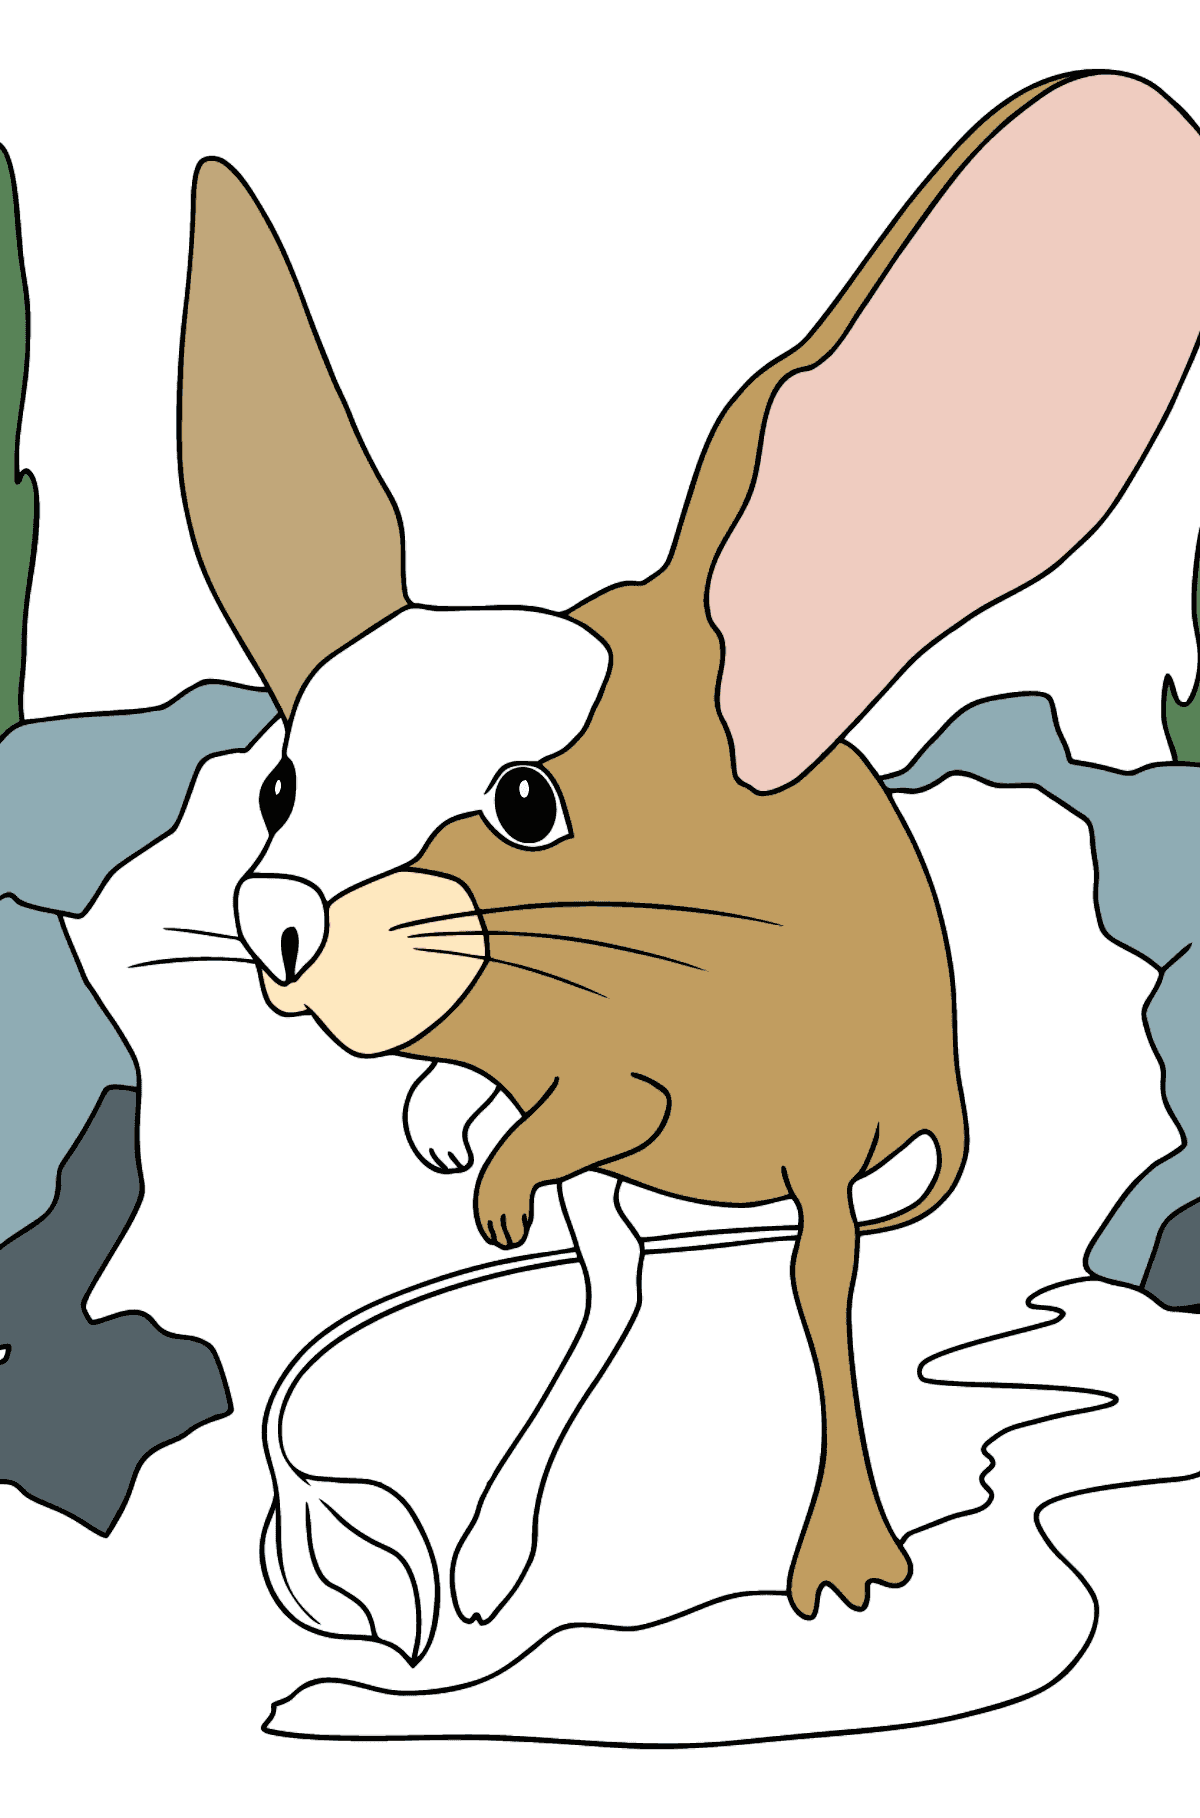 Coloring Page - A Jerboa - Coloring Pages for Kids